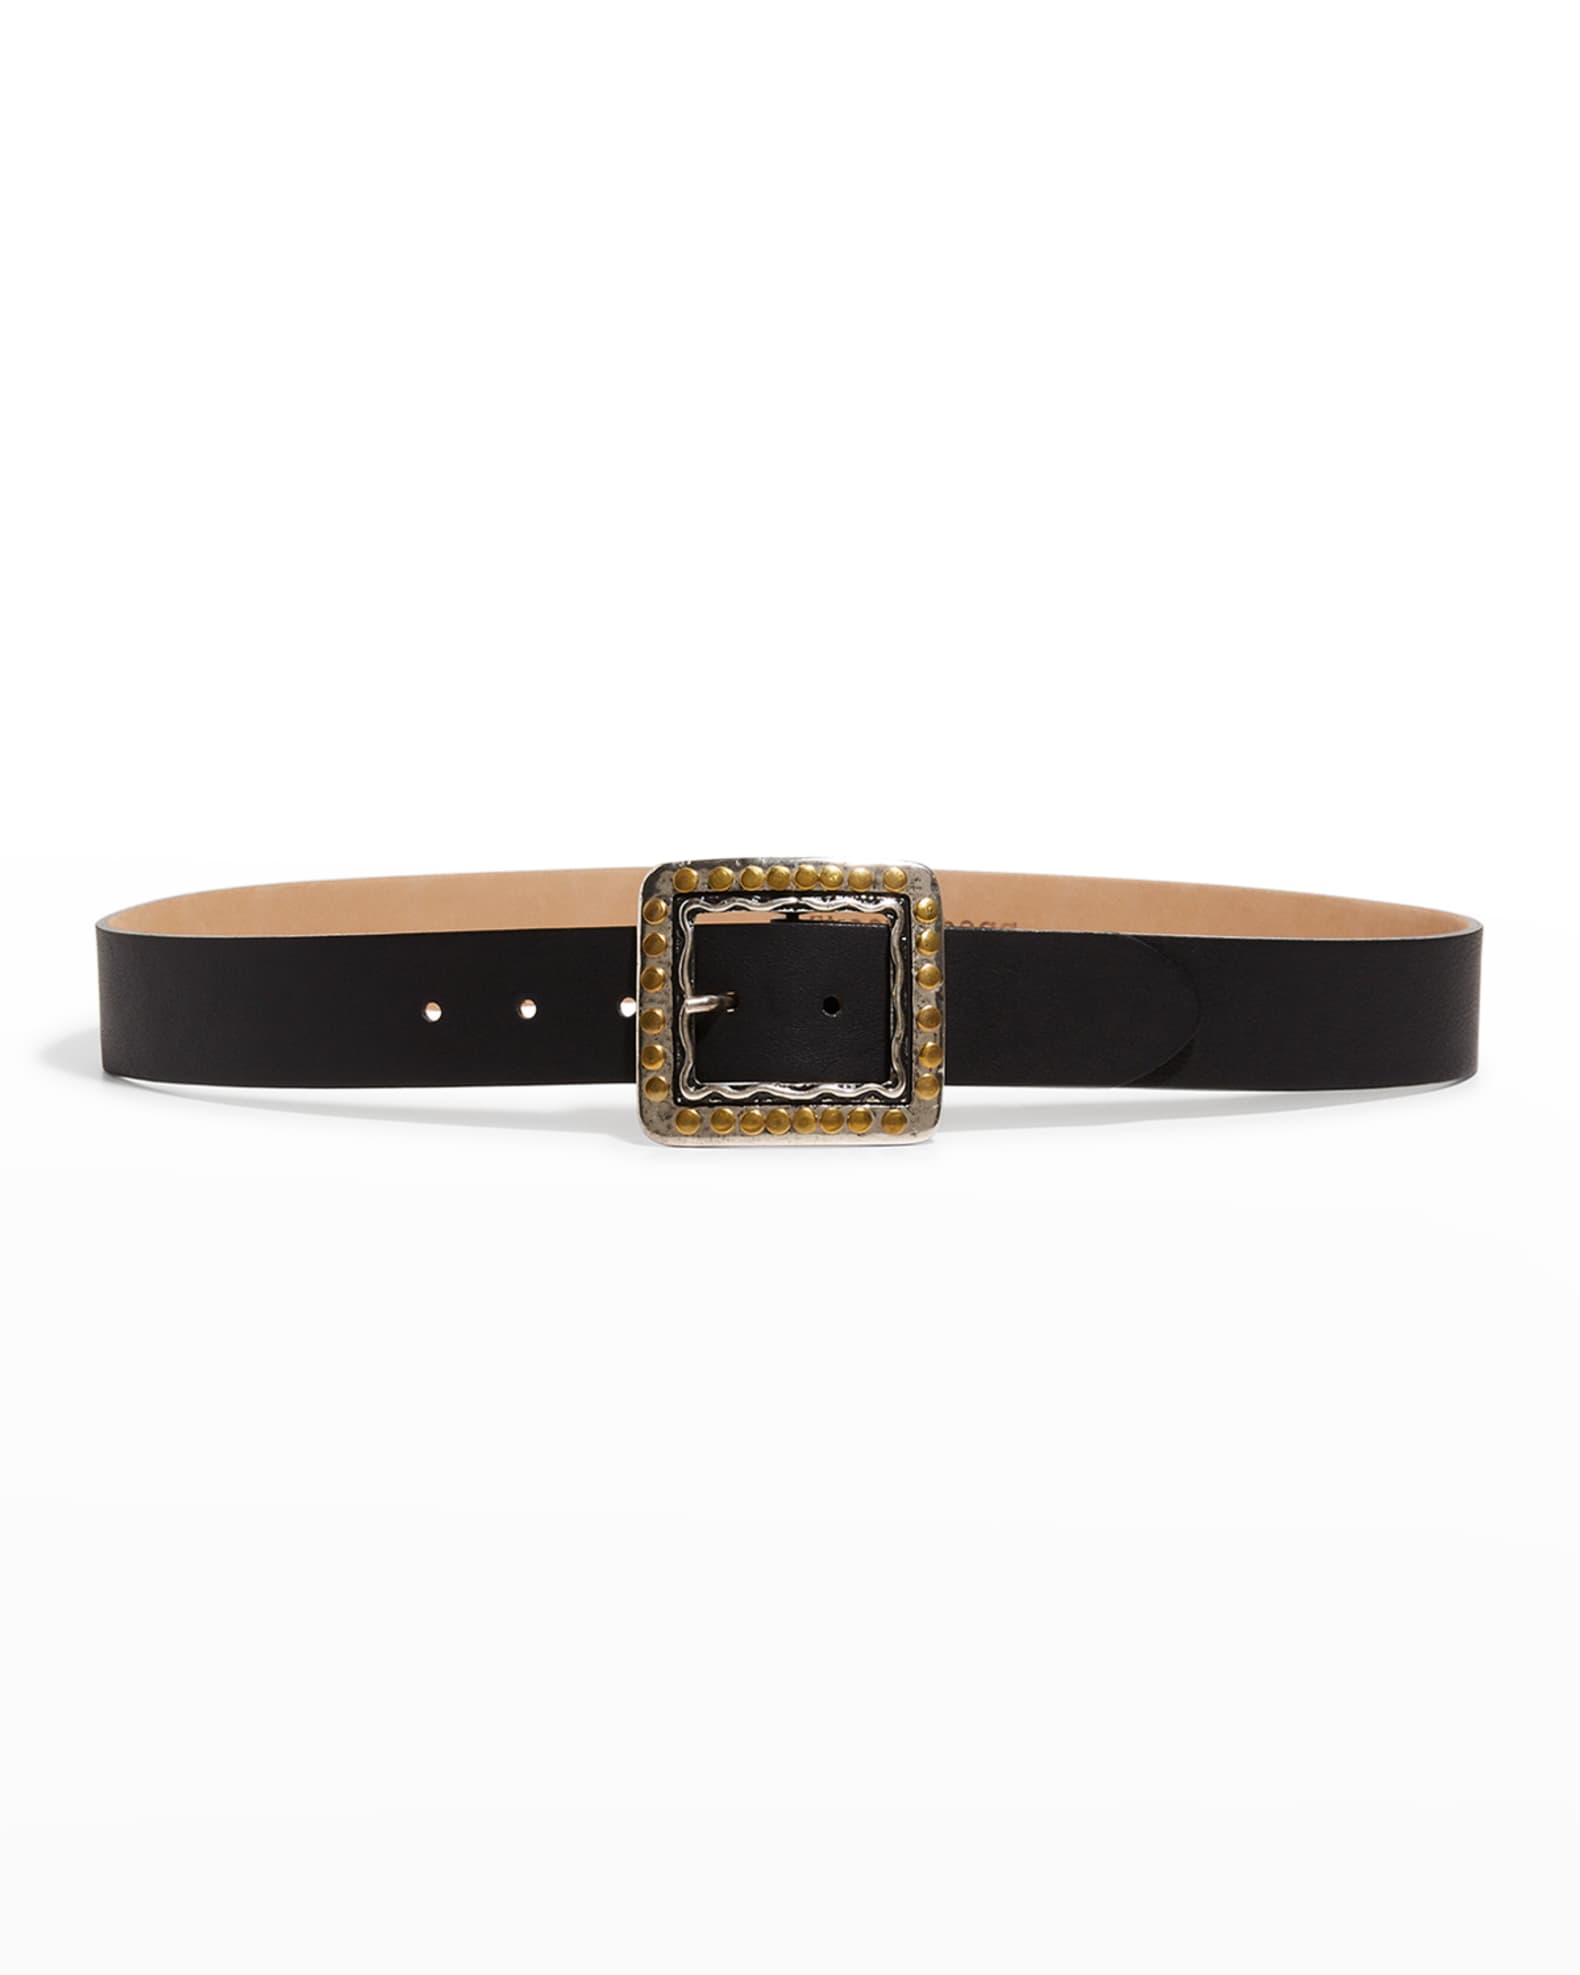 Streets Ahead Antique Square Studded Leather Belt | Neiman Marcus